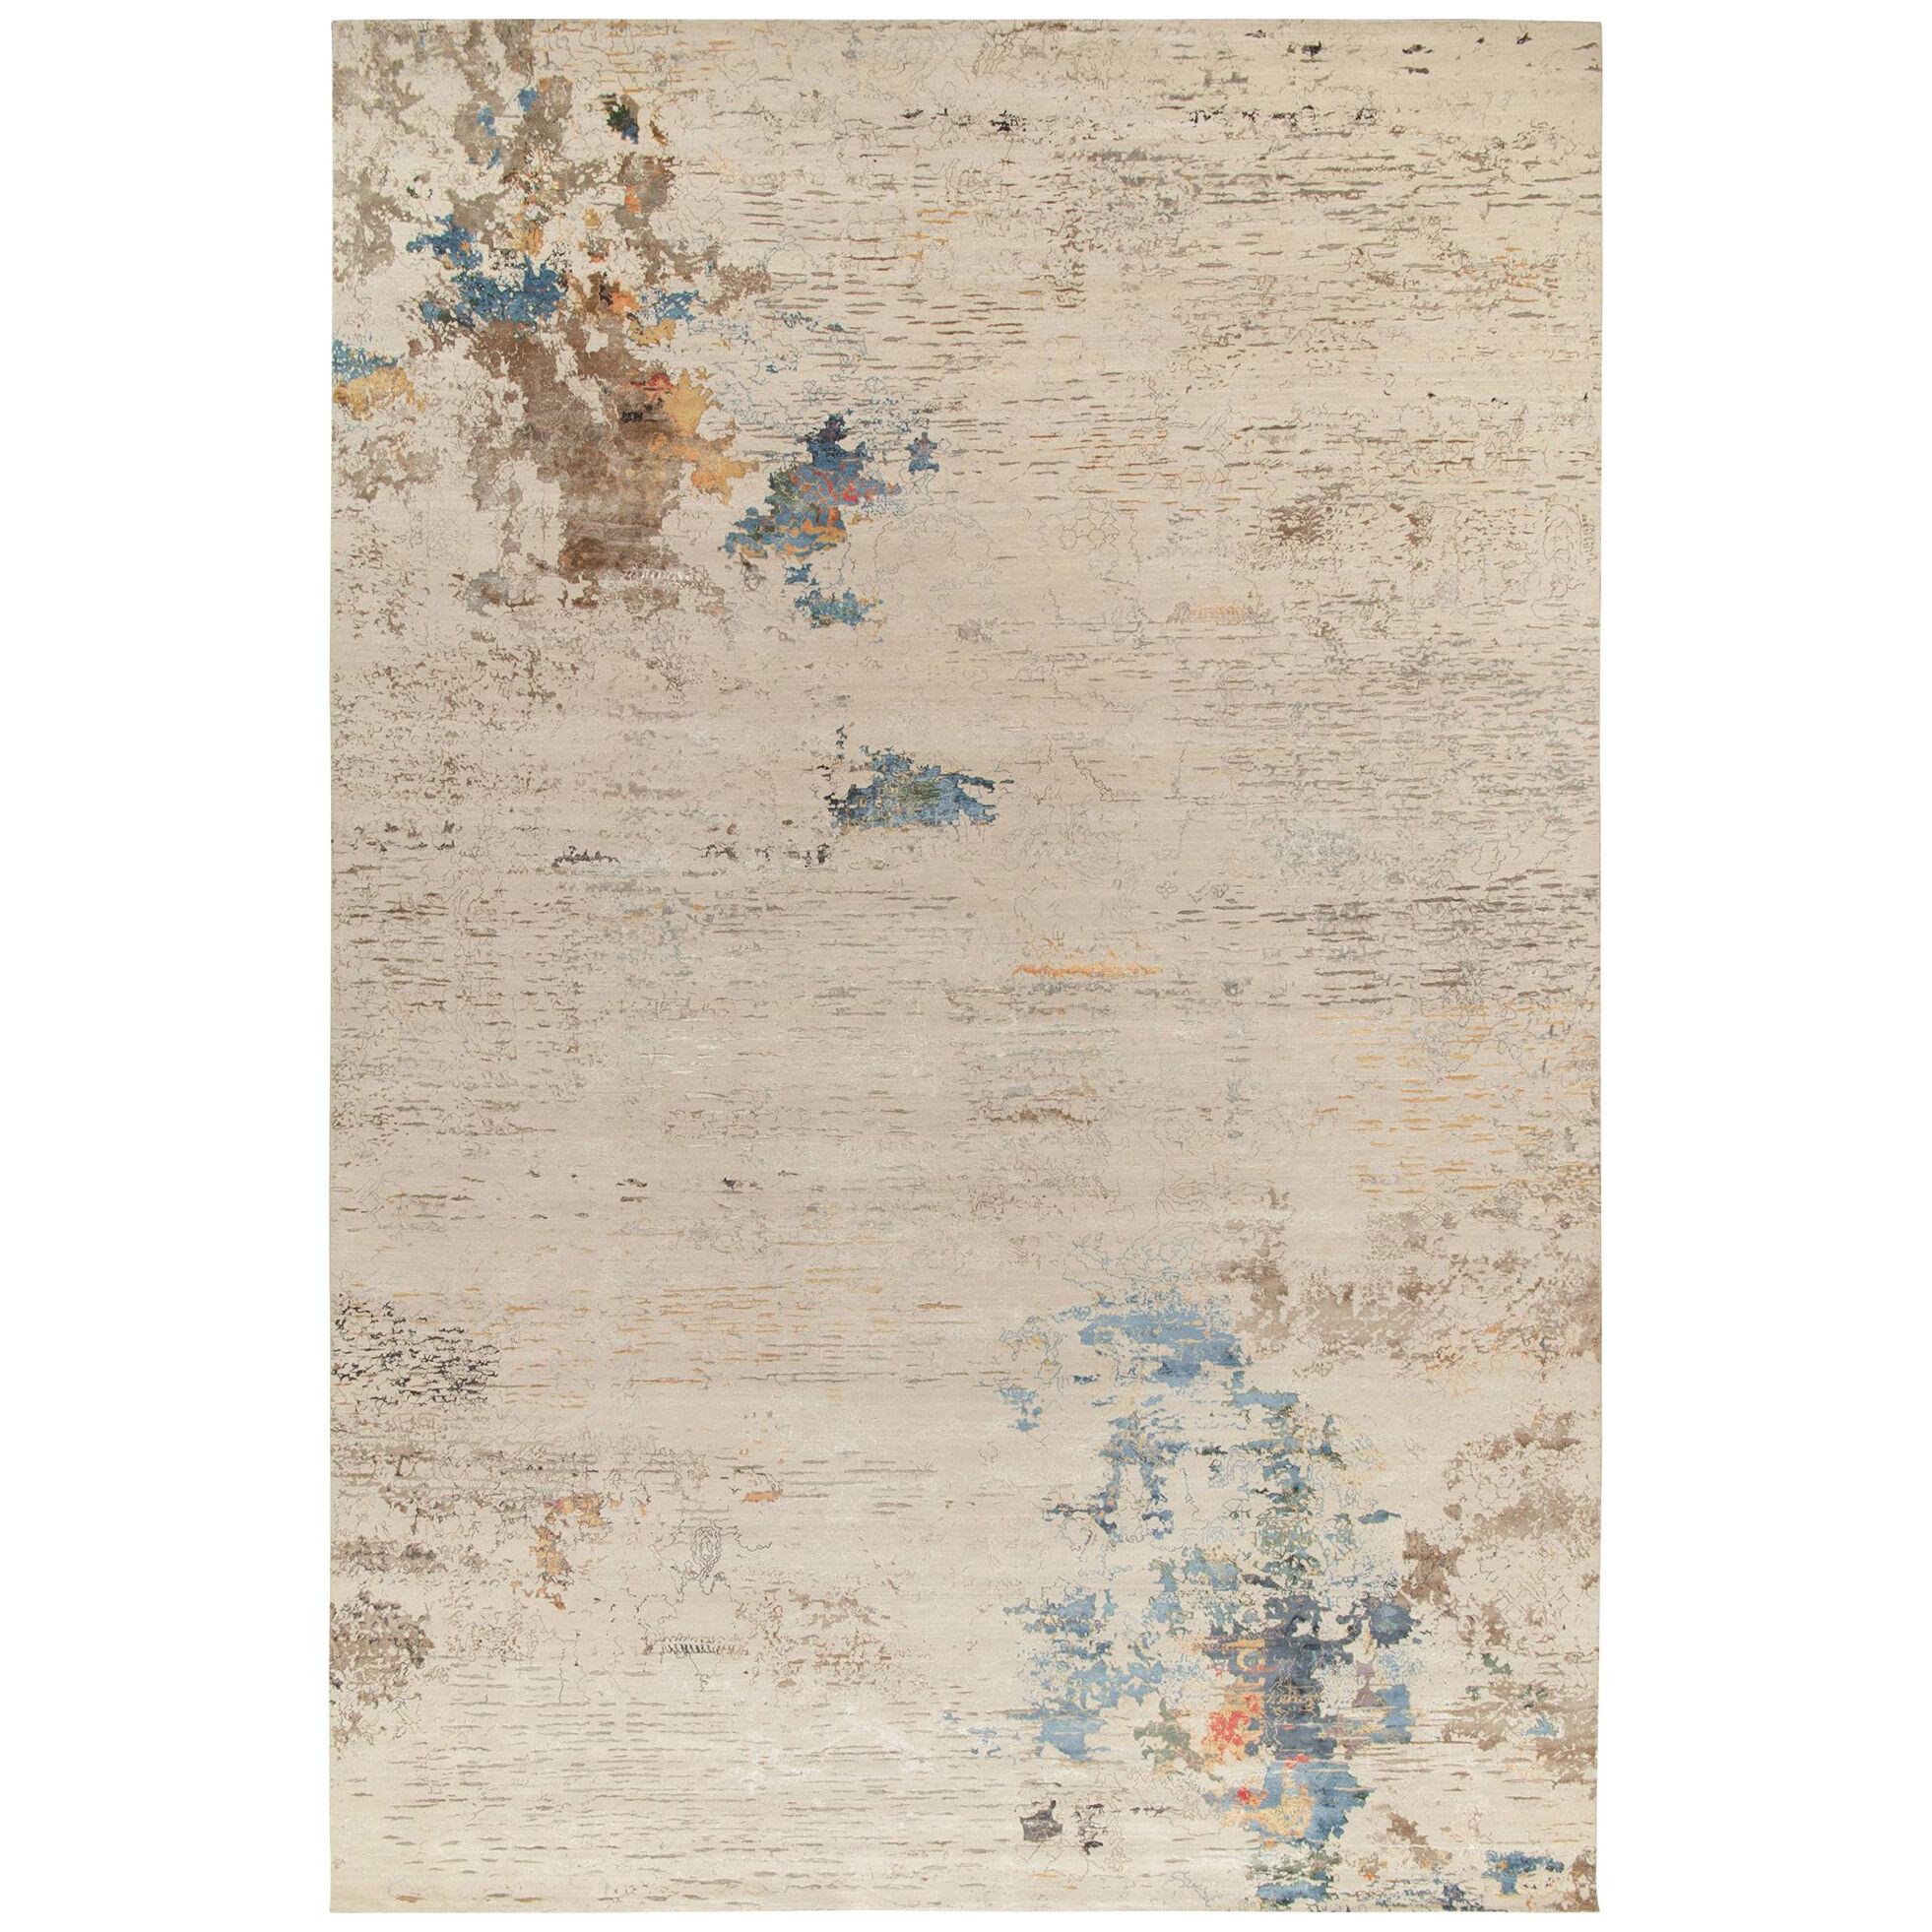 Rug & Kilim’s Modern Abstract Rug in Beige-Brown and Blue Painterly Patterns